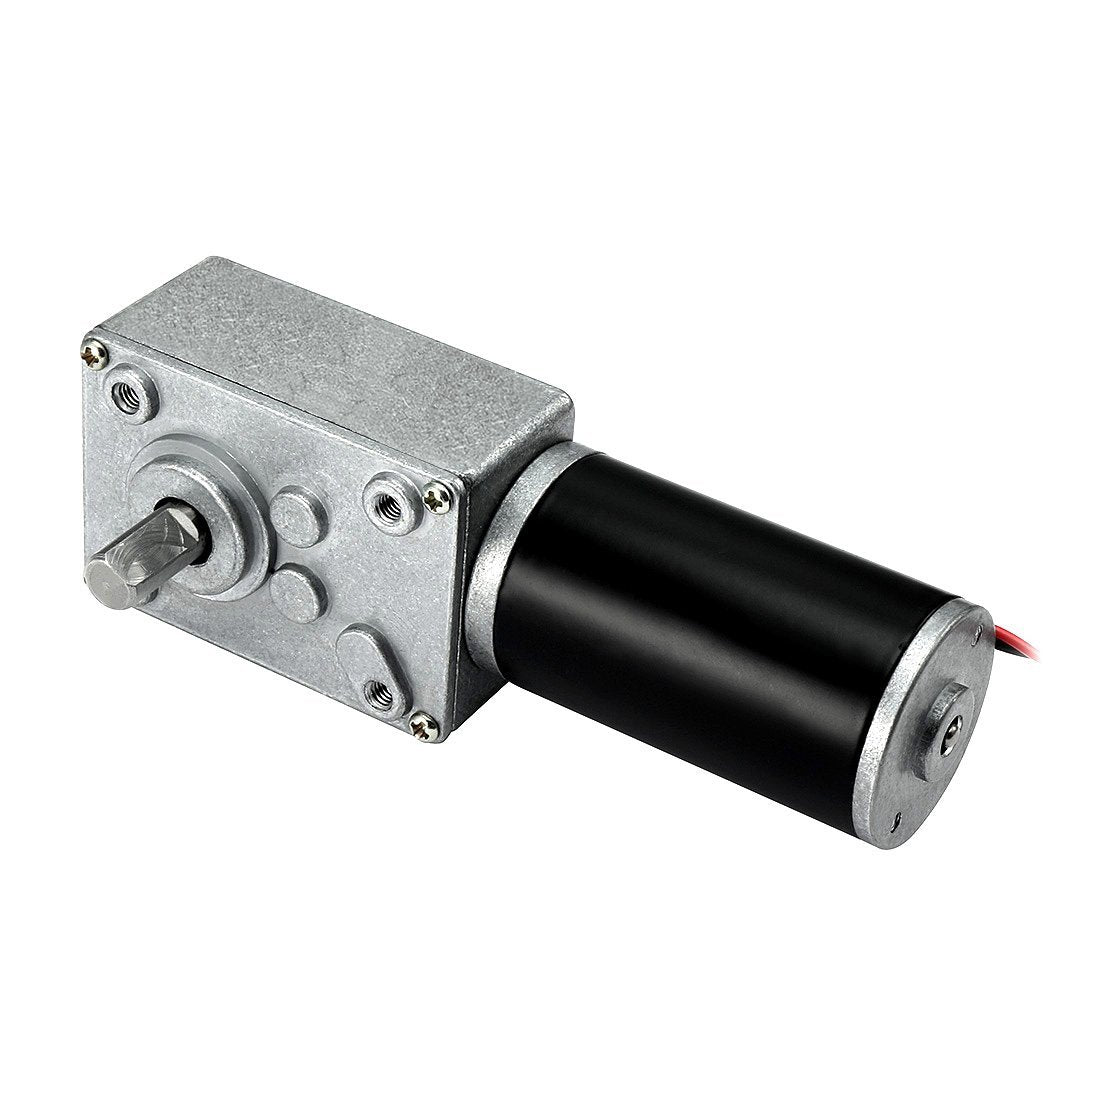 uxcell Uxcell DC 24V 5RPM High Torque Electric Power Speed Reduce Turbine Worm Gear Box Motor